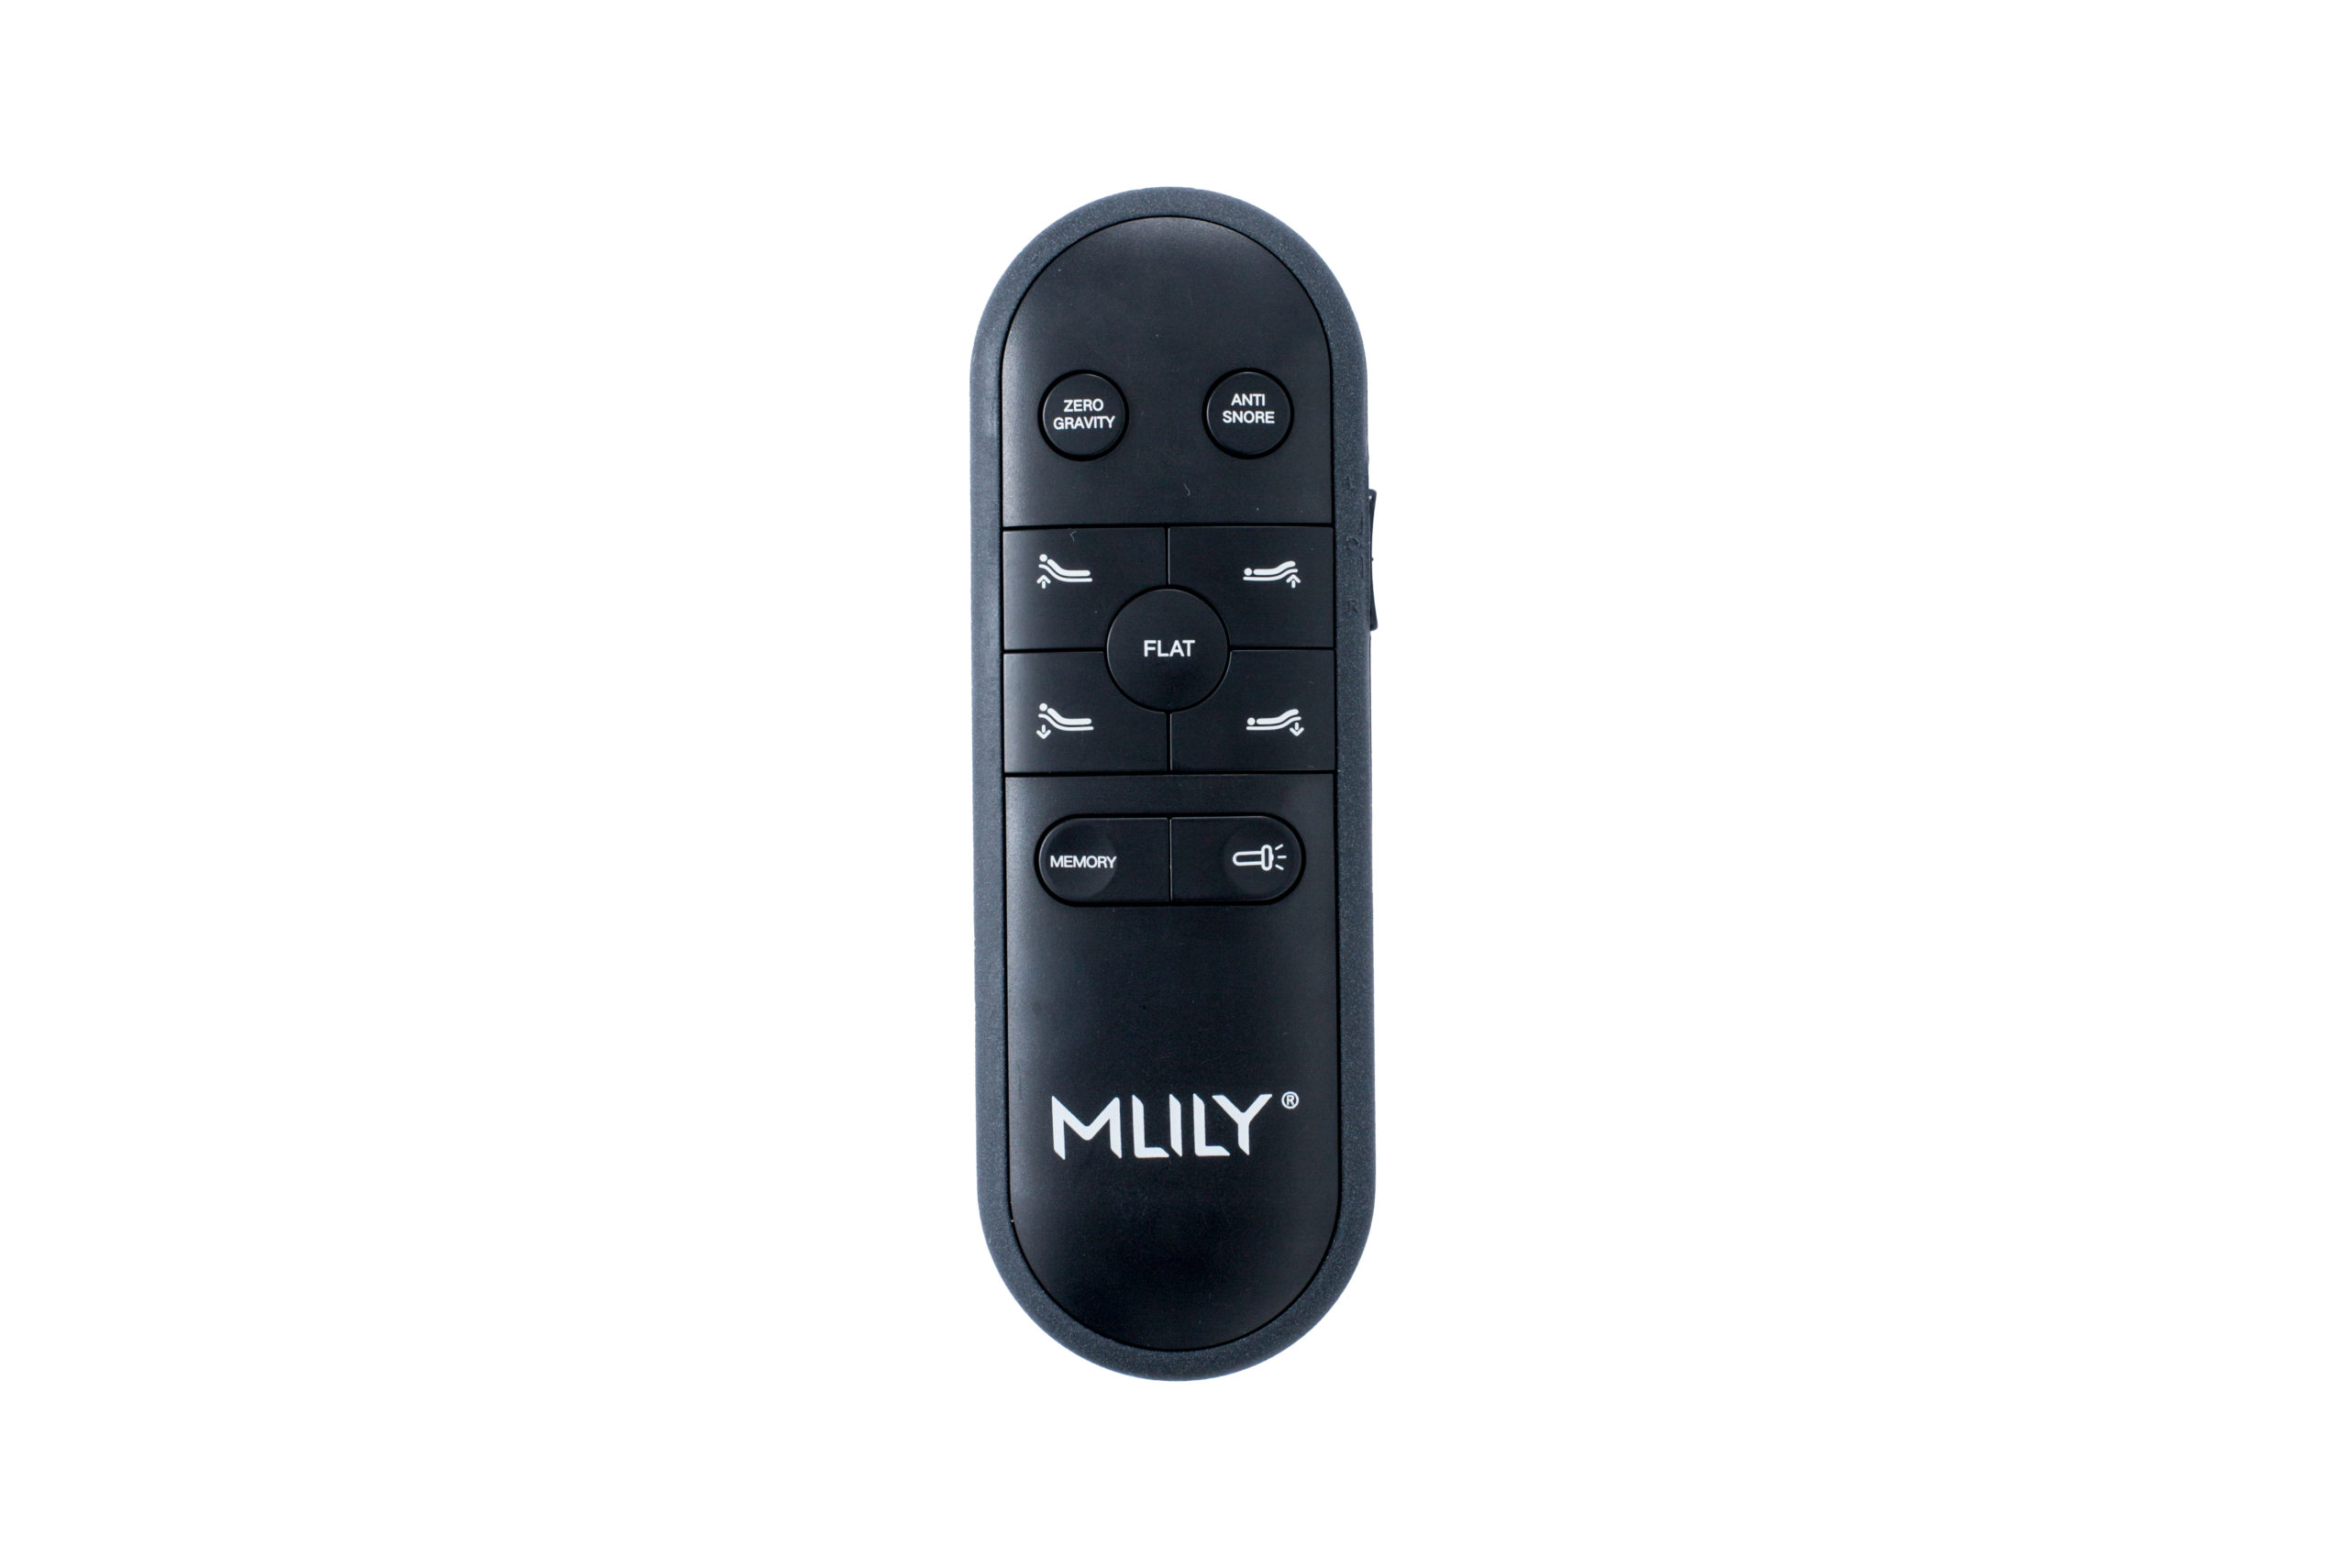 A black NH200SA Base wireless remote control with 9 buttons and a white MLILY logo on the front, shown against a white background.